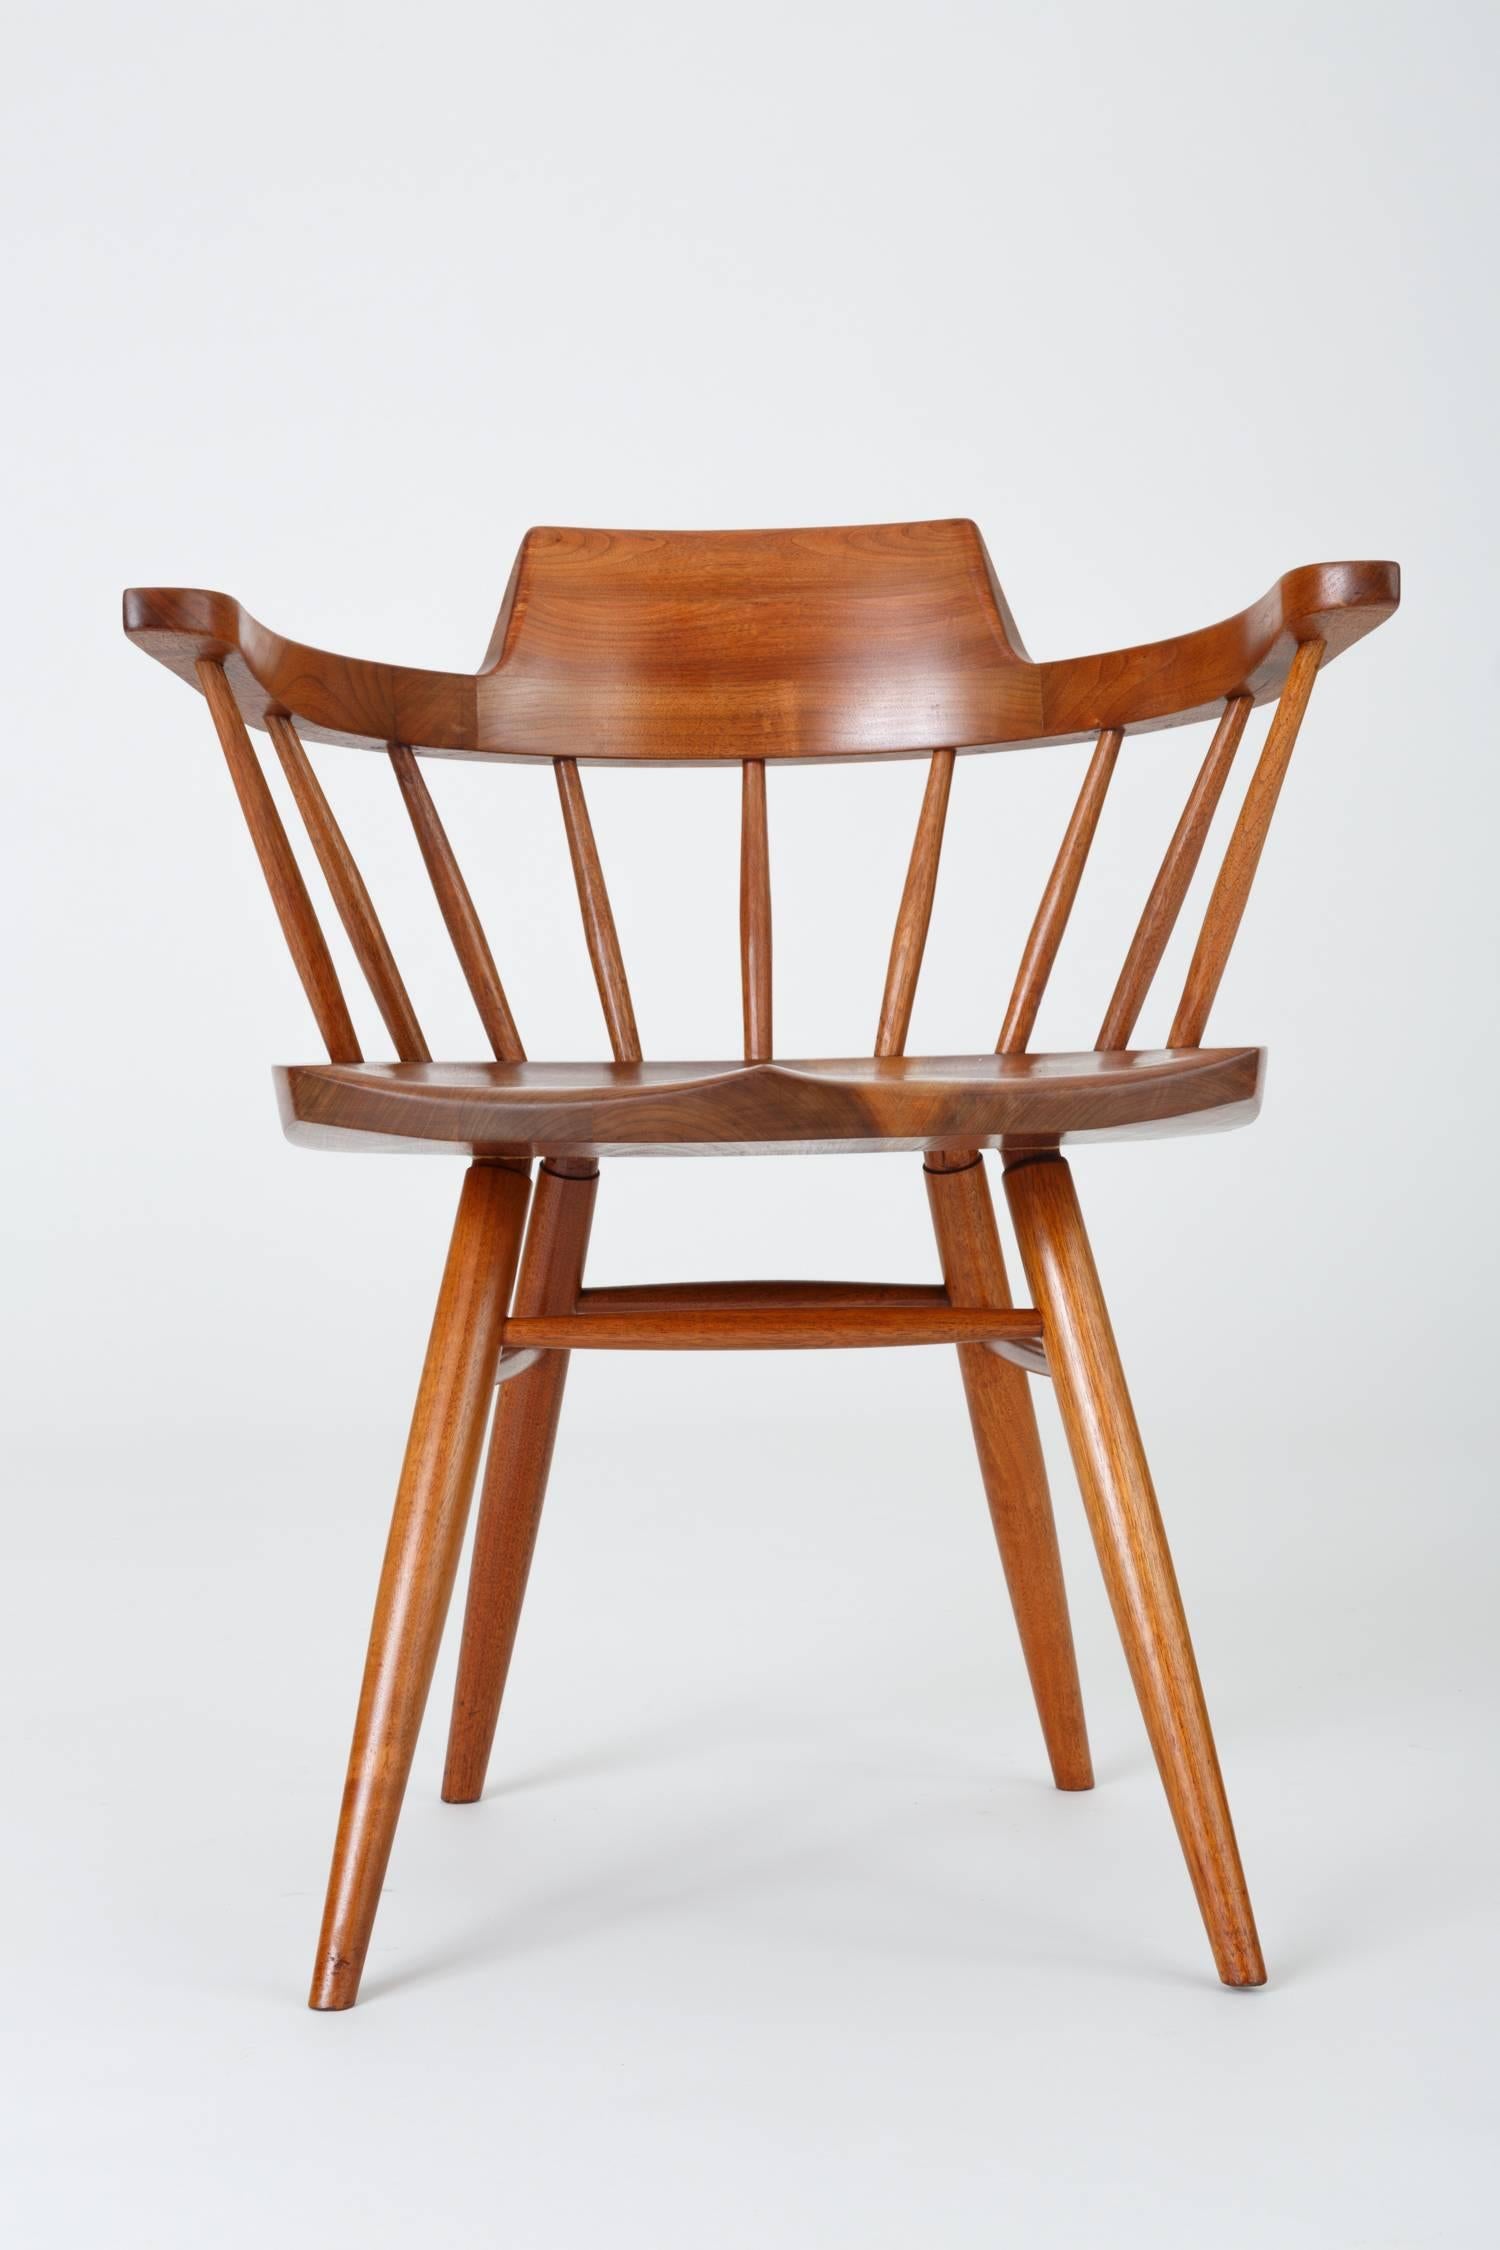 American Set of Four Black Walnut Captain's Chairs by George Nakashima Studio